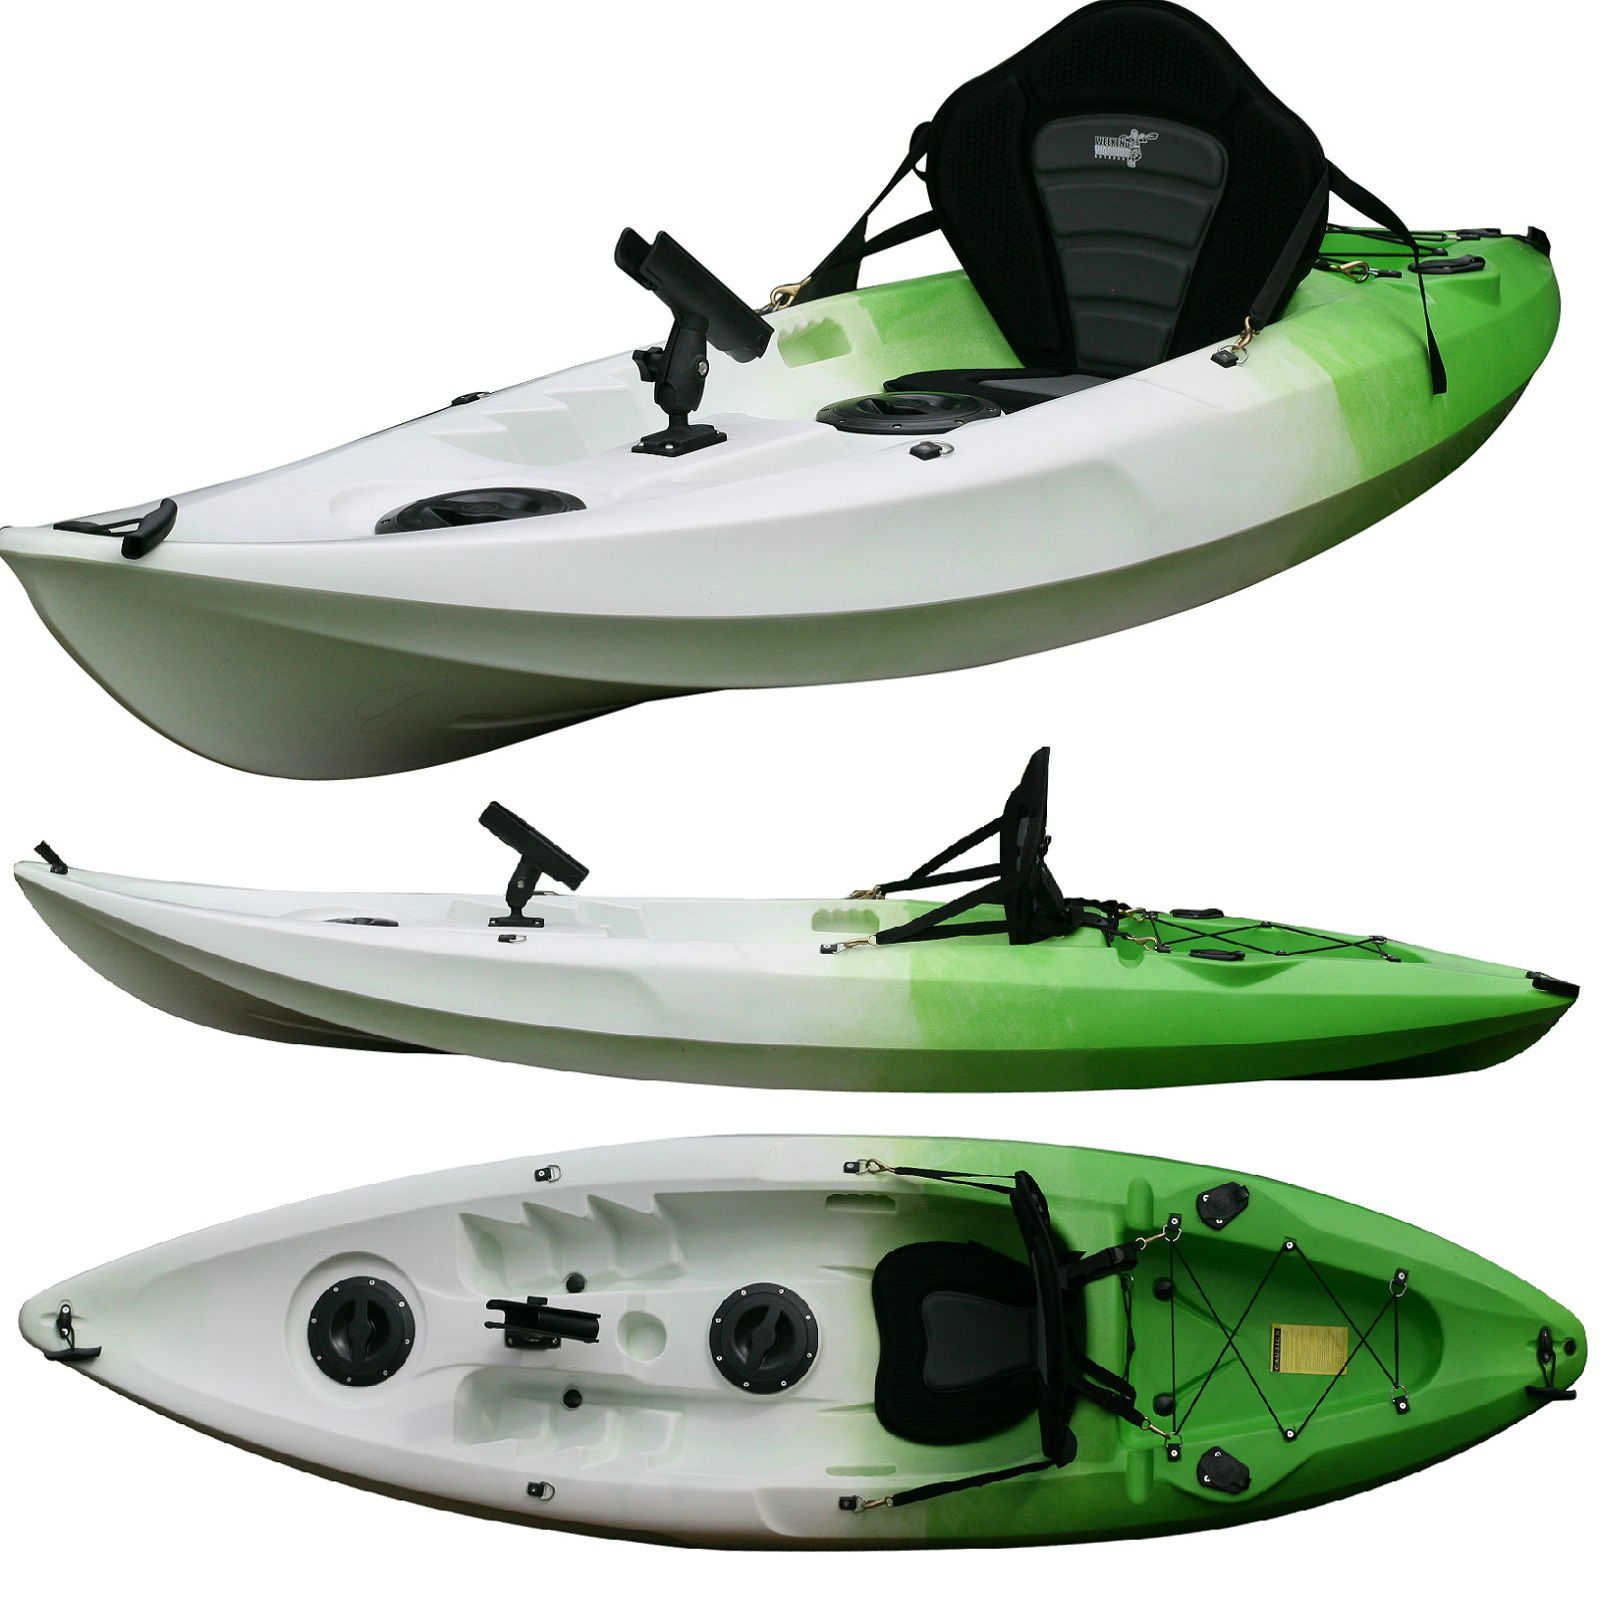 Fishing Kayak For Sale  $499 Includes Paddle And Seat